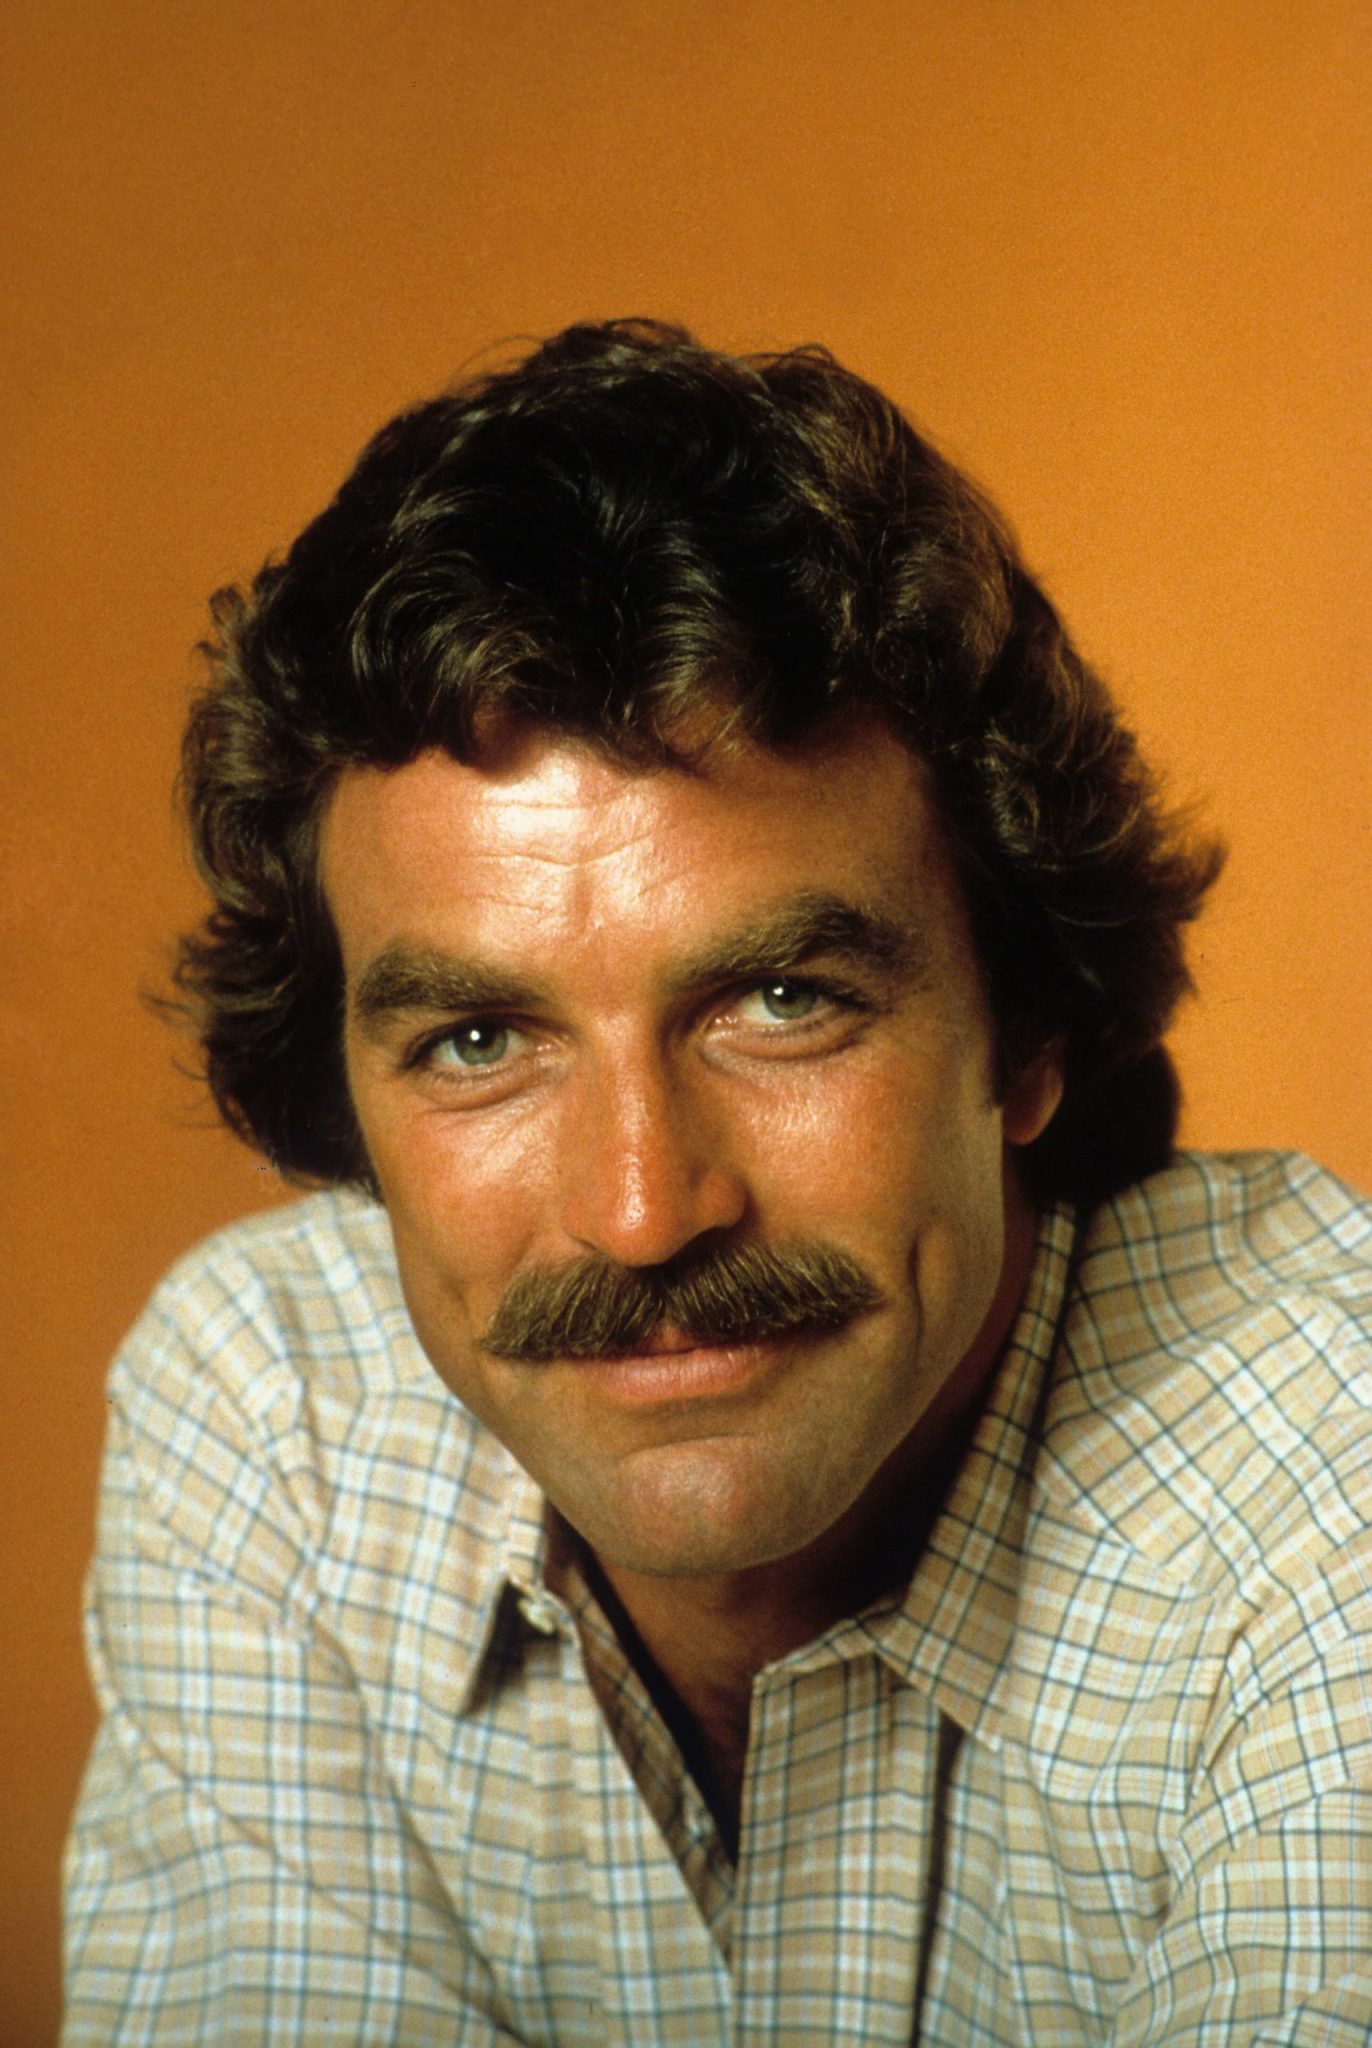 Tom Selleck admits to “messed up” health issues after over 50 years of ...